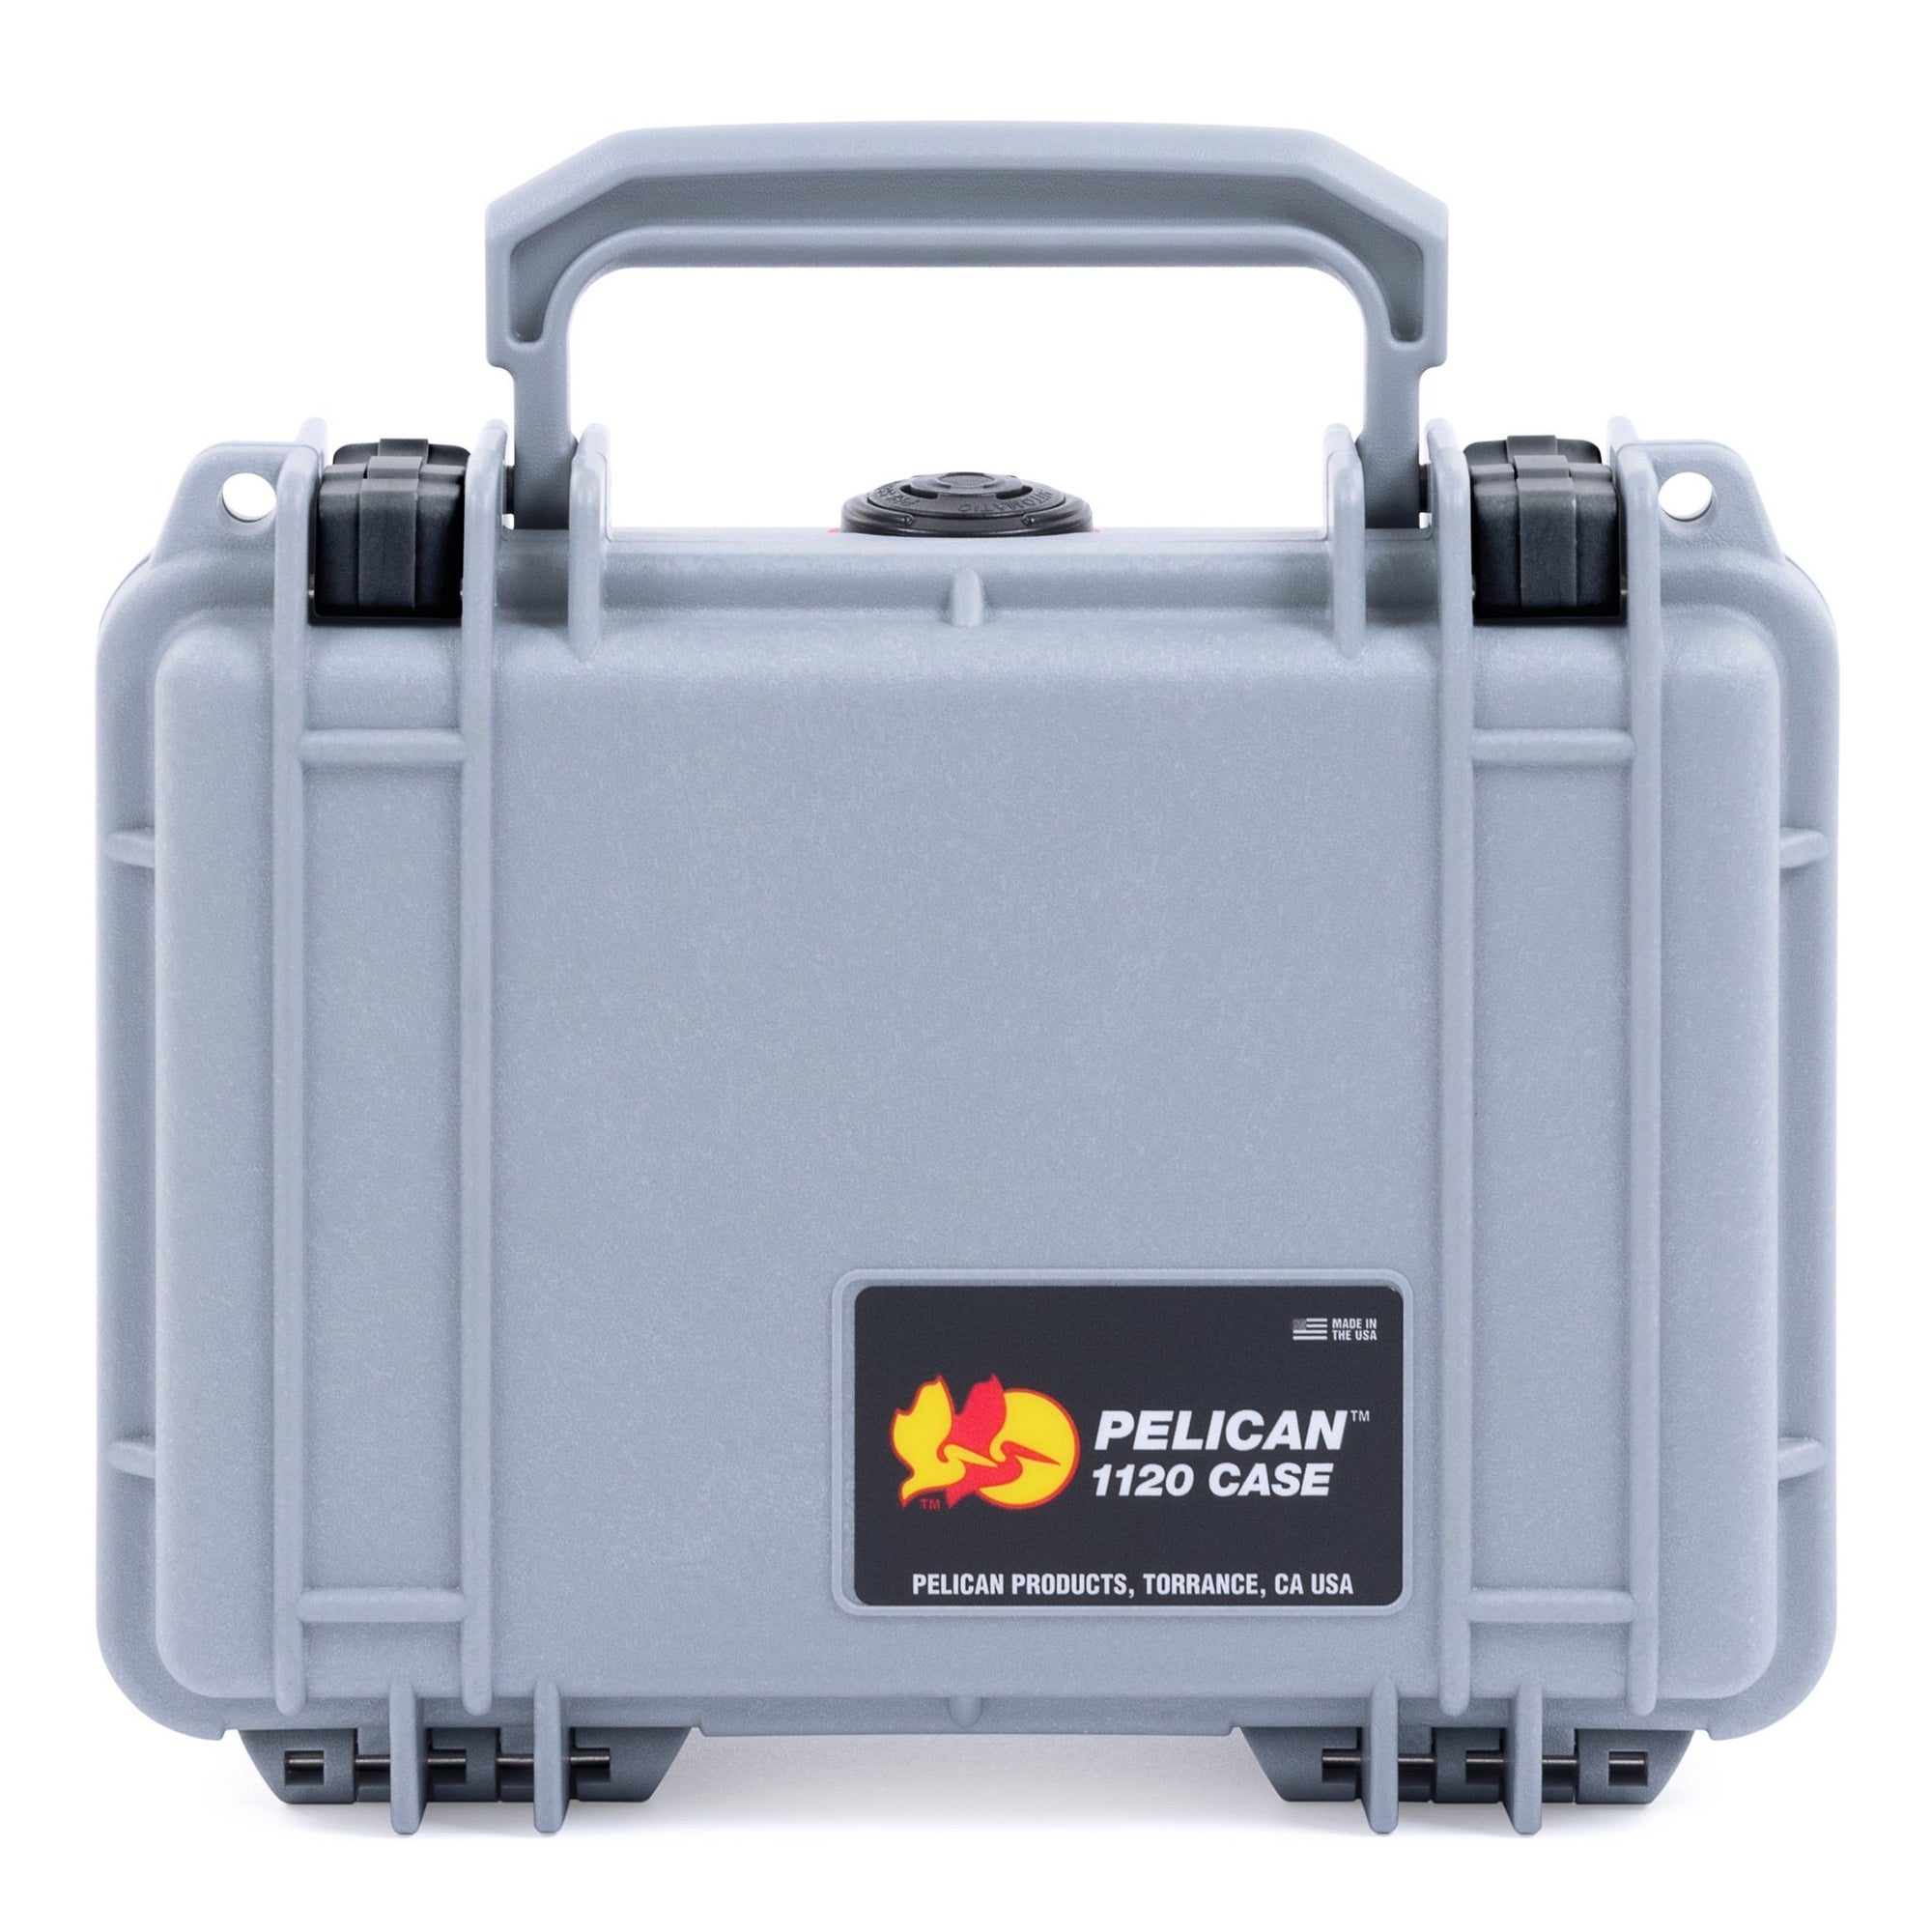 Pelican 1120 Case, Silver with Black Latches ColorCase 